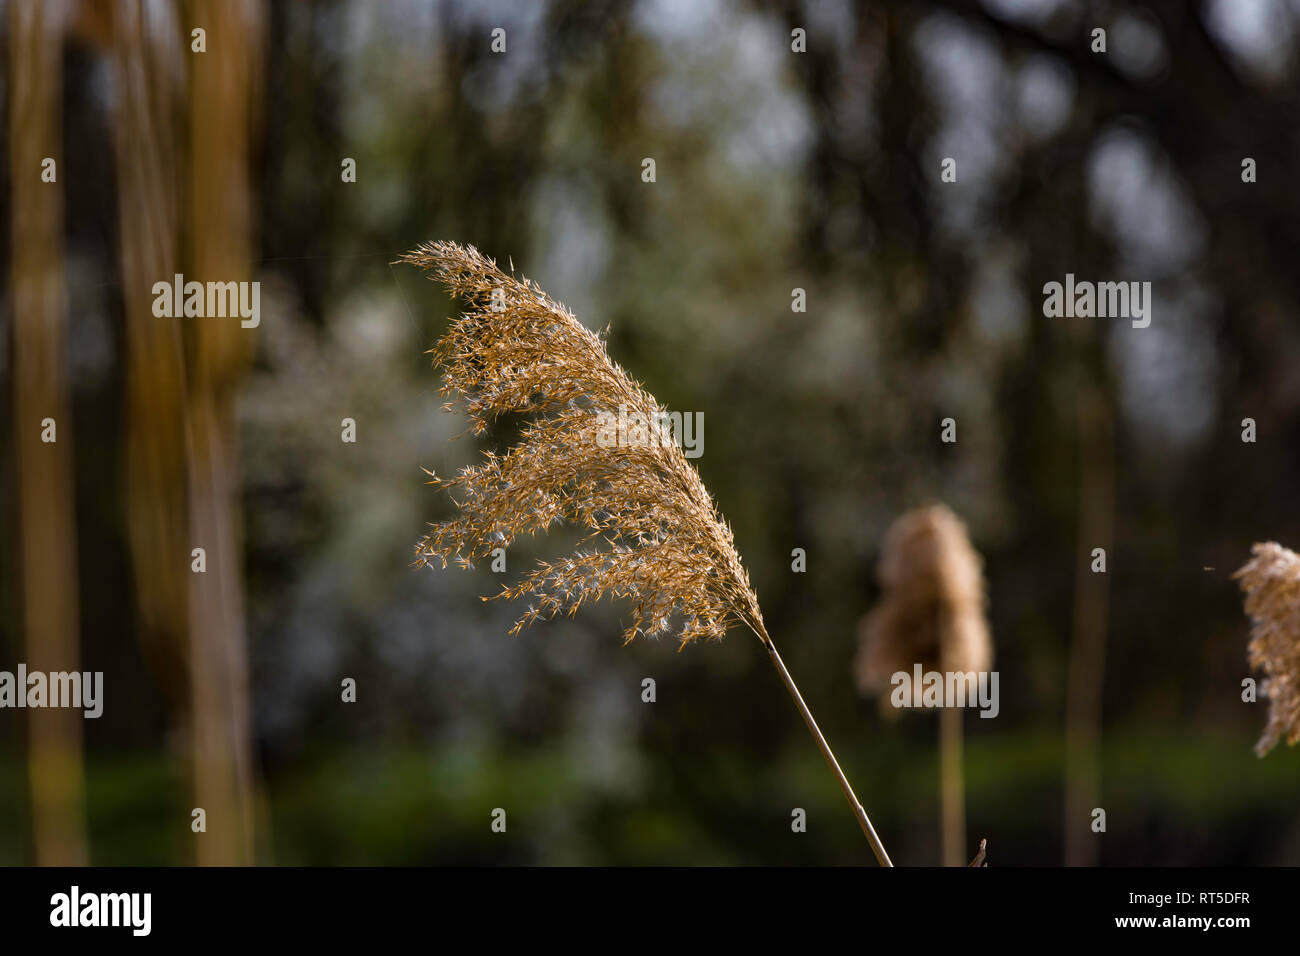 beautiful swamp grass, also known as Schoenoplectus, Bulrushes, pampas, on a blurred background Stock Photo